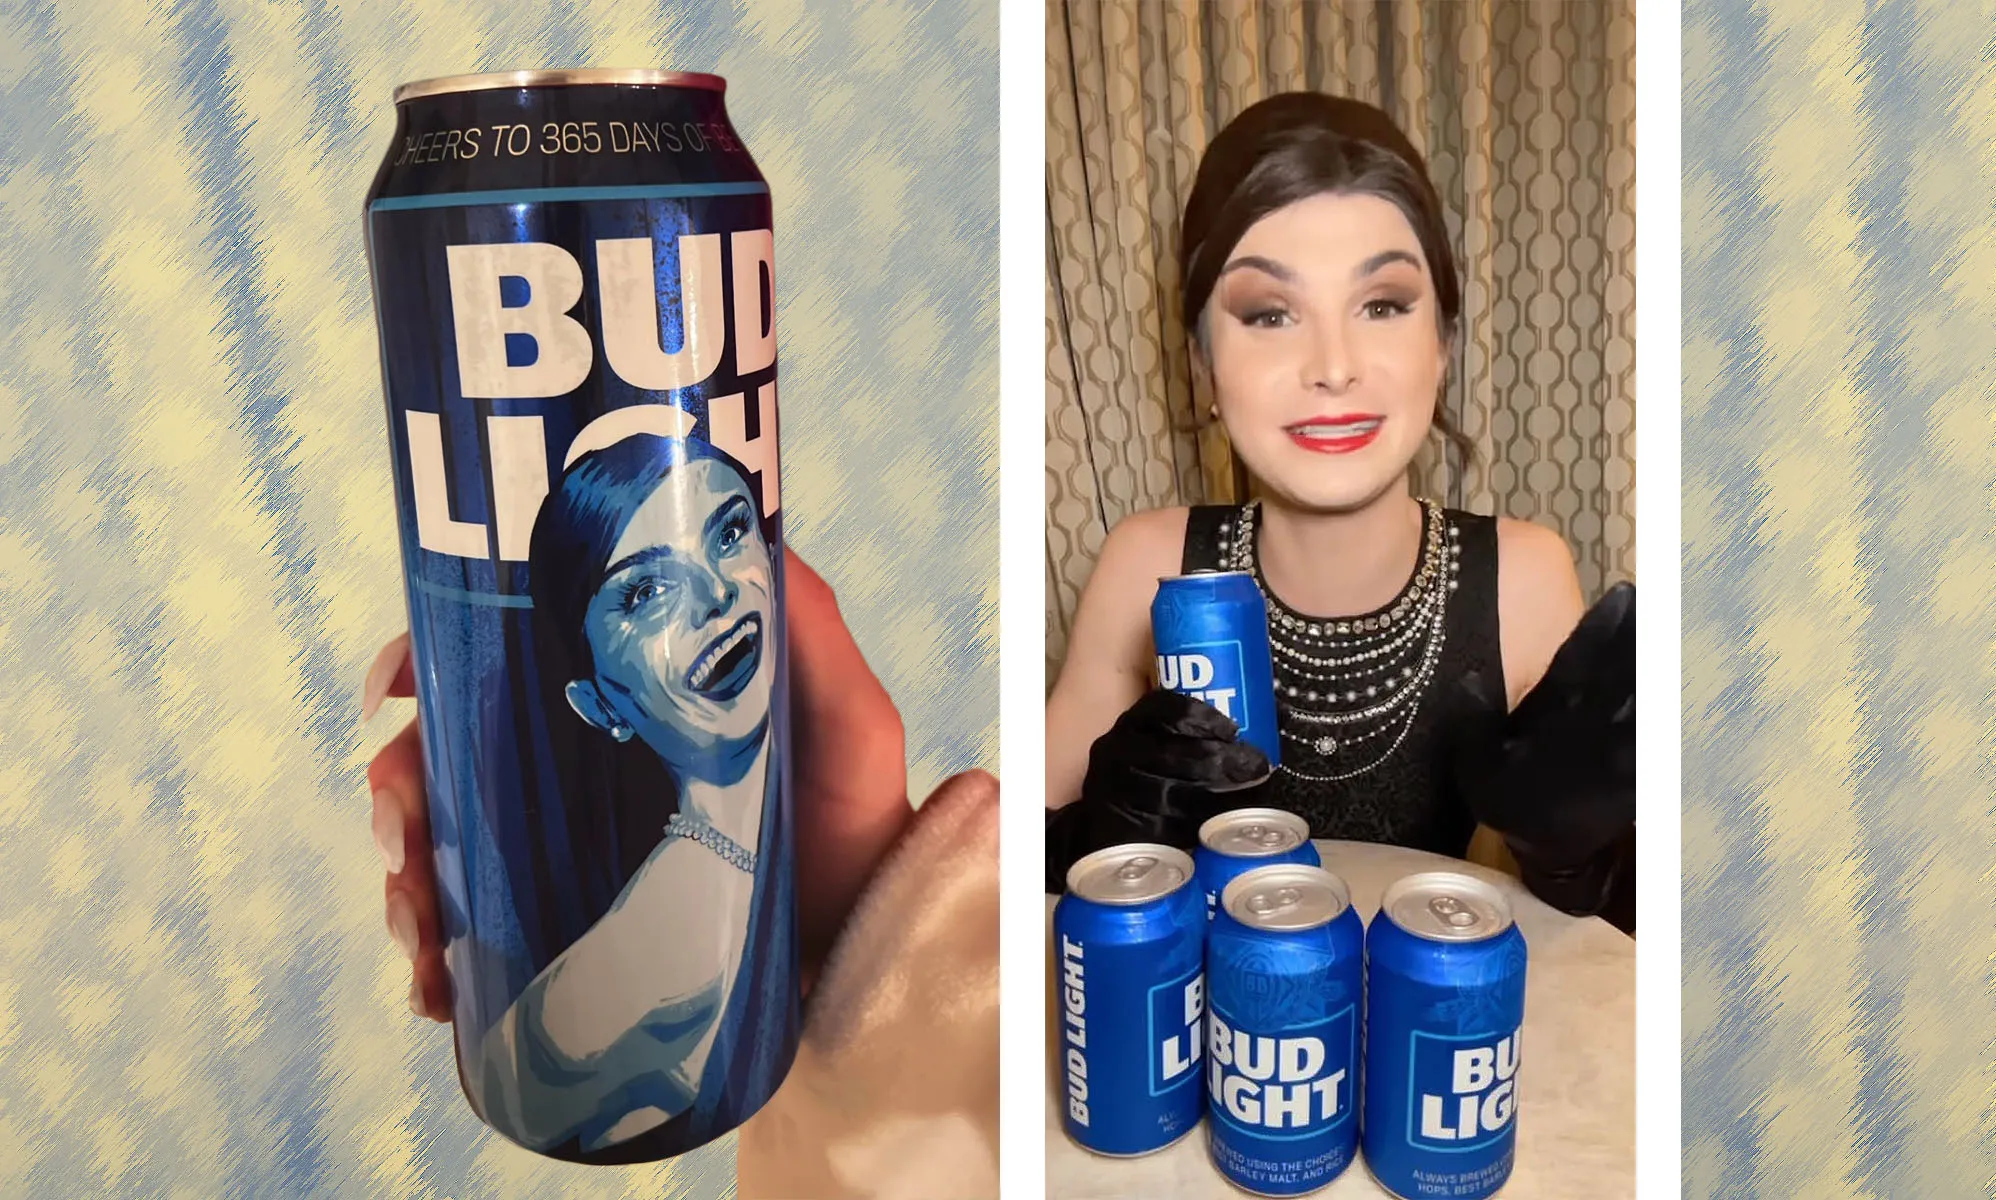 Bud Light CEO's 'pathetic' response to Dylan Mulvaney backlash